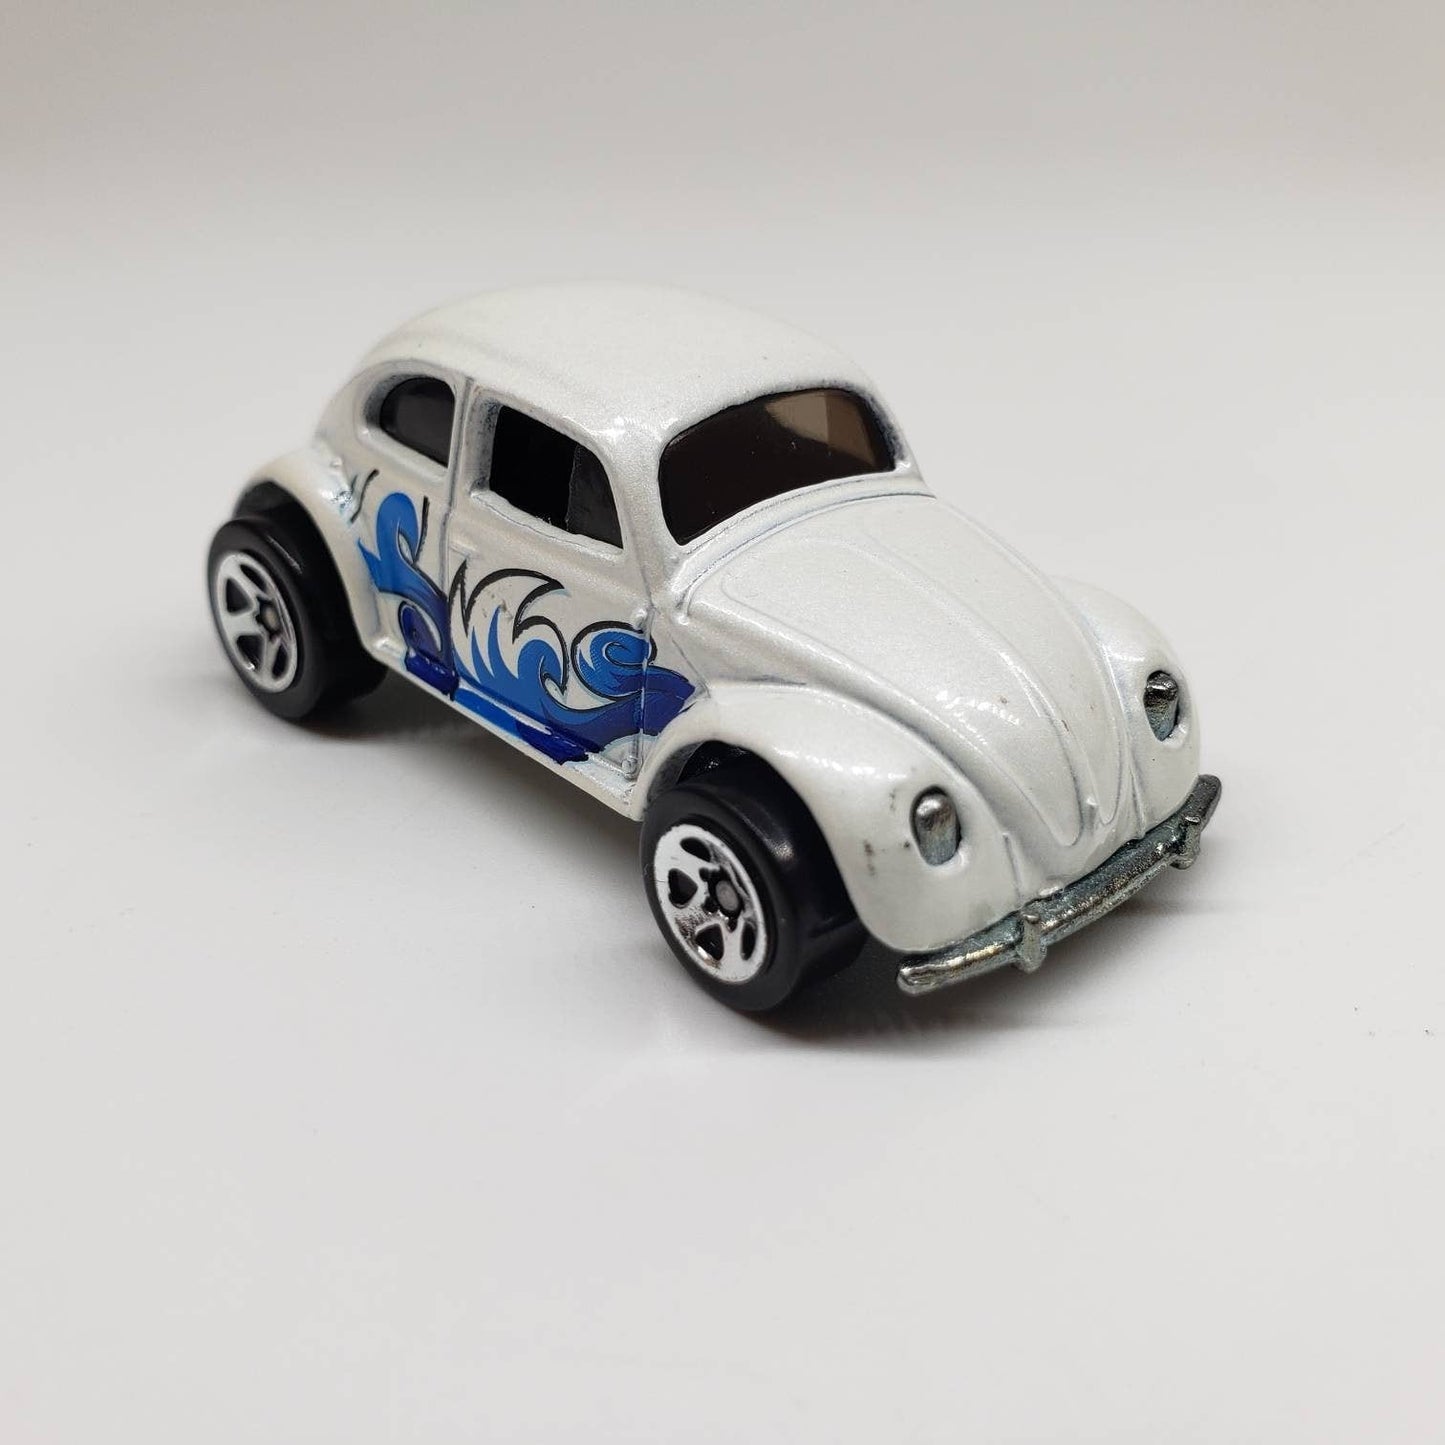 Hot Wheels VW Bug White Open Stock Volkswagen Beetle Collectible Miniature Scale Model Toy Car Perfect Birthday Gift